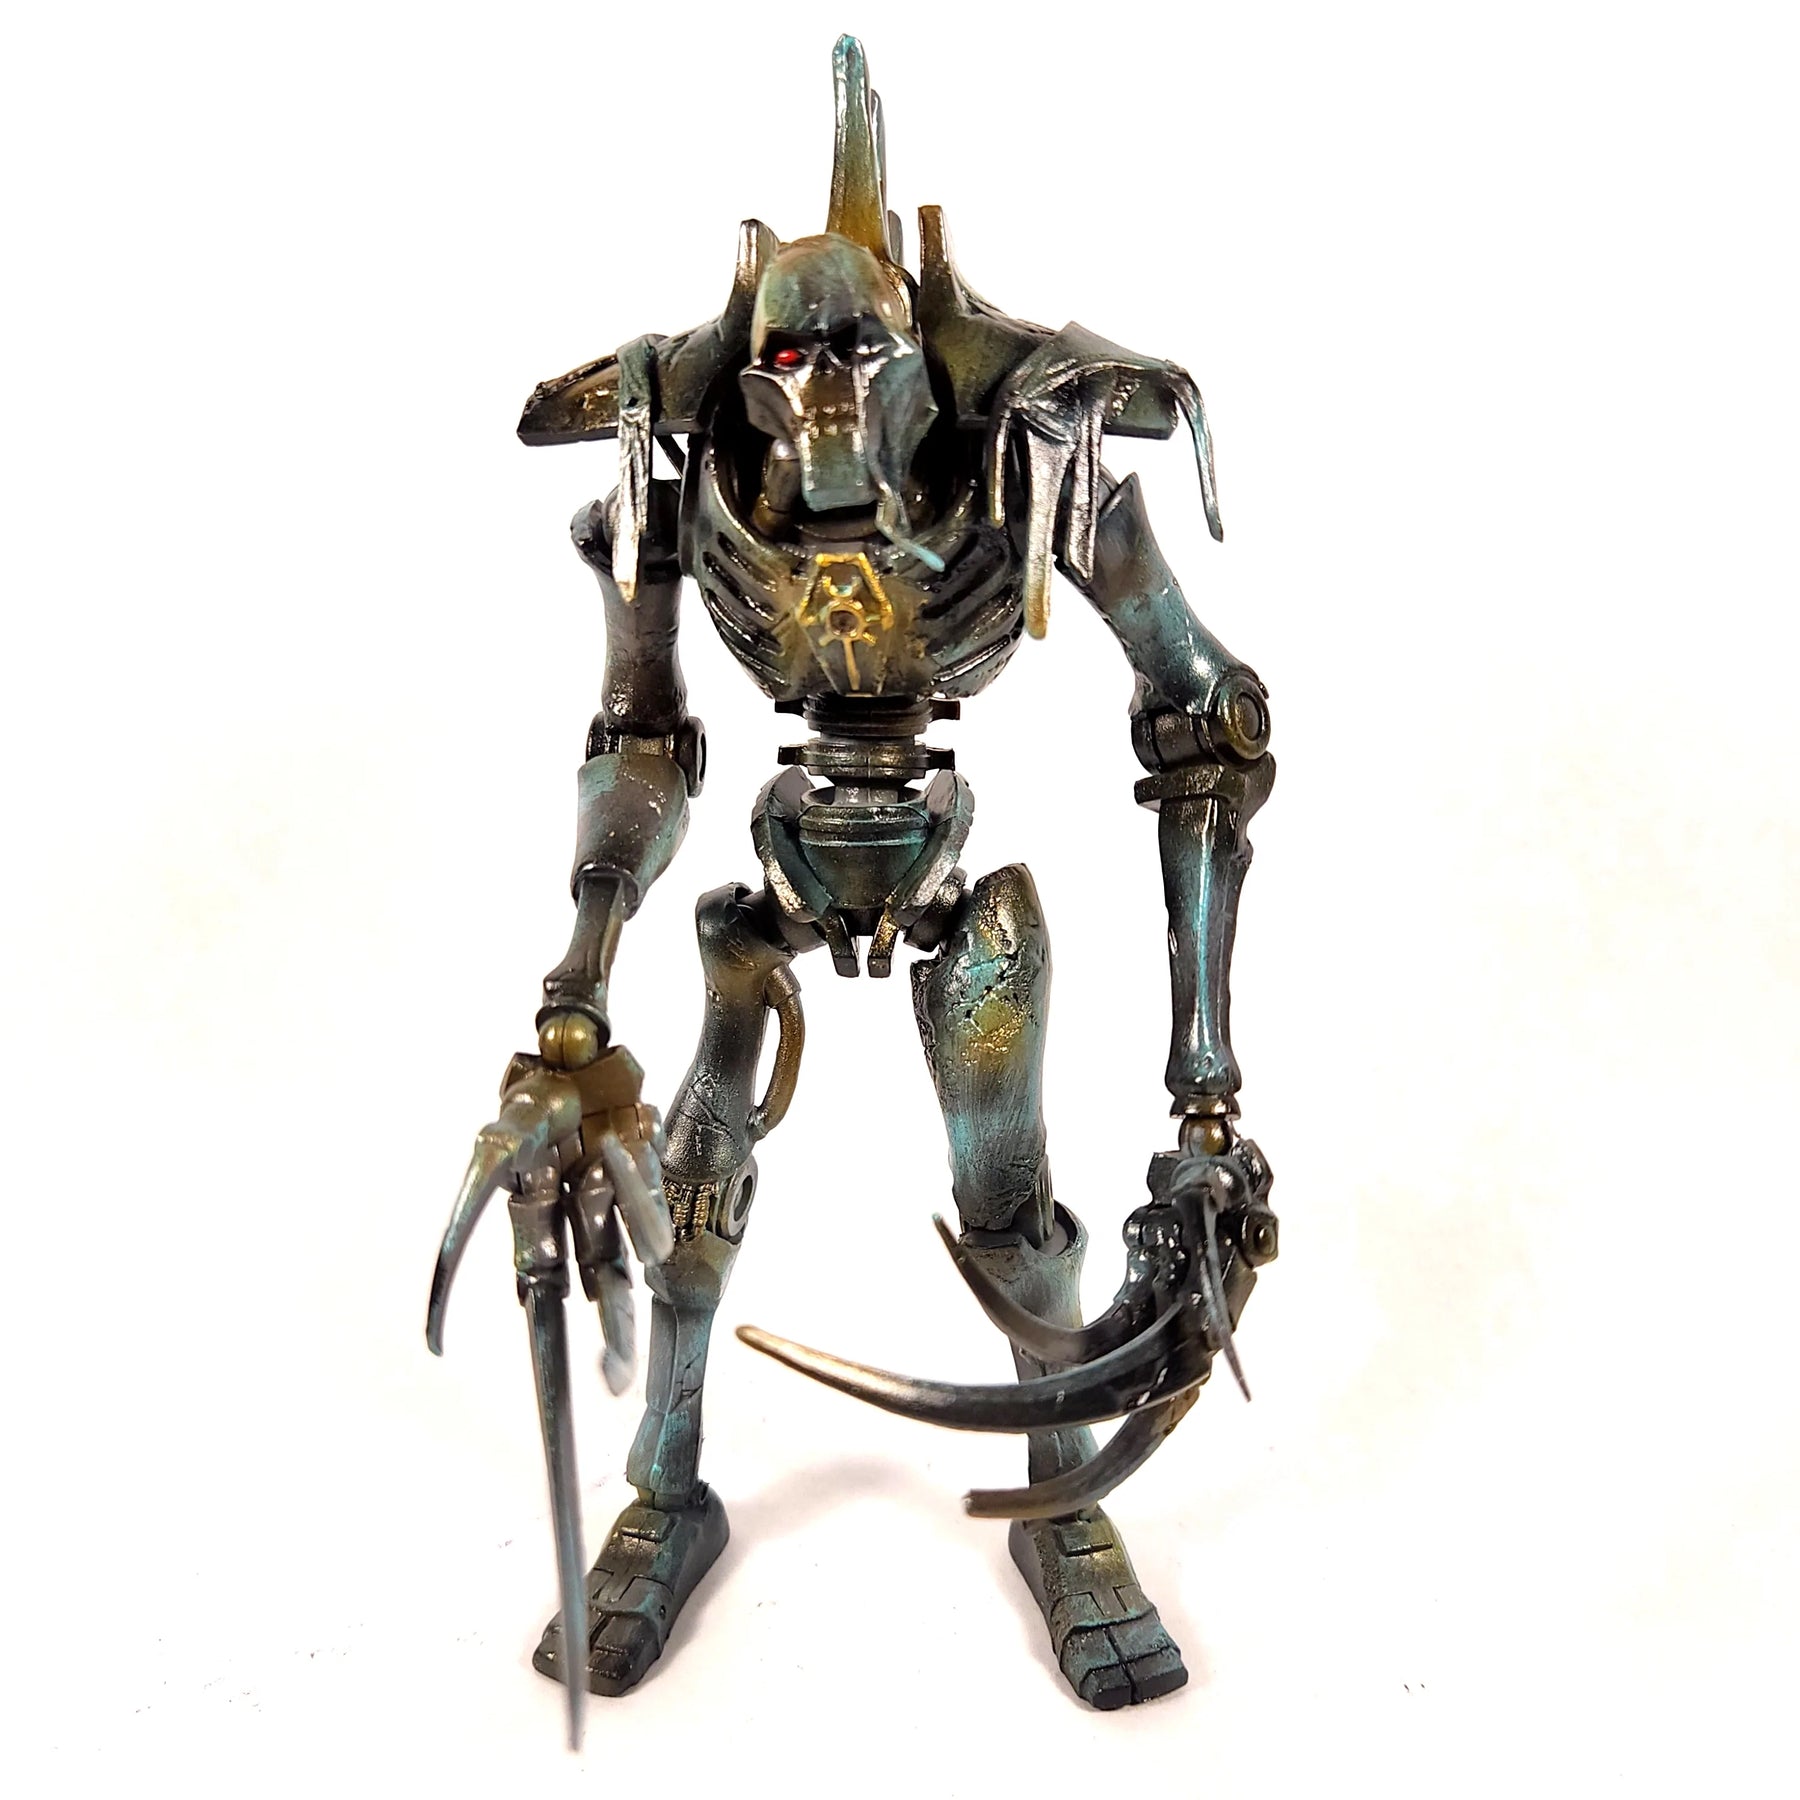 Warhammer 40,000 Necron Flayed One custom by Forces of Dorkness Available Now